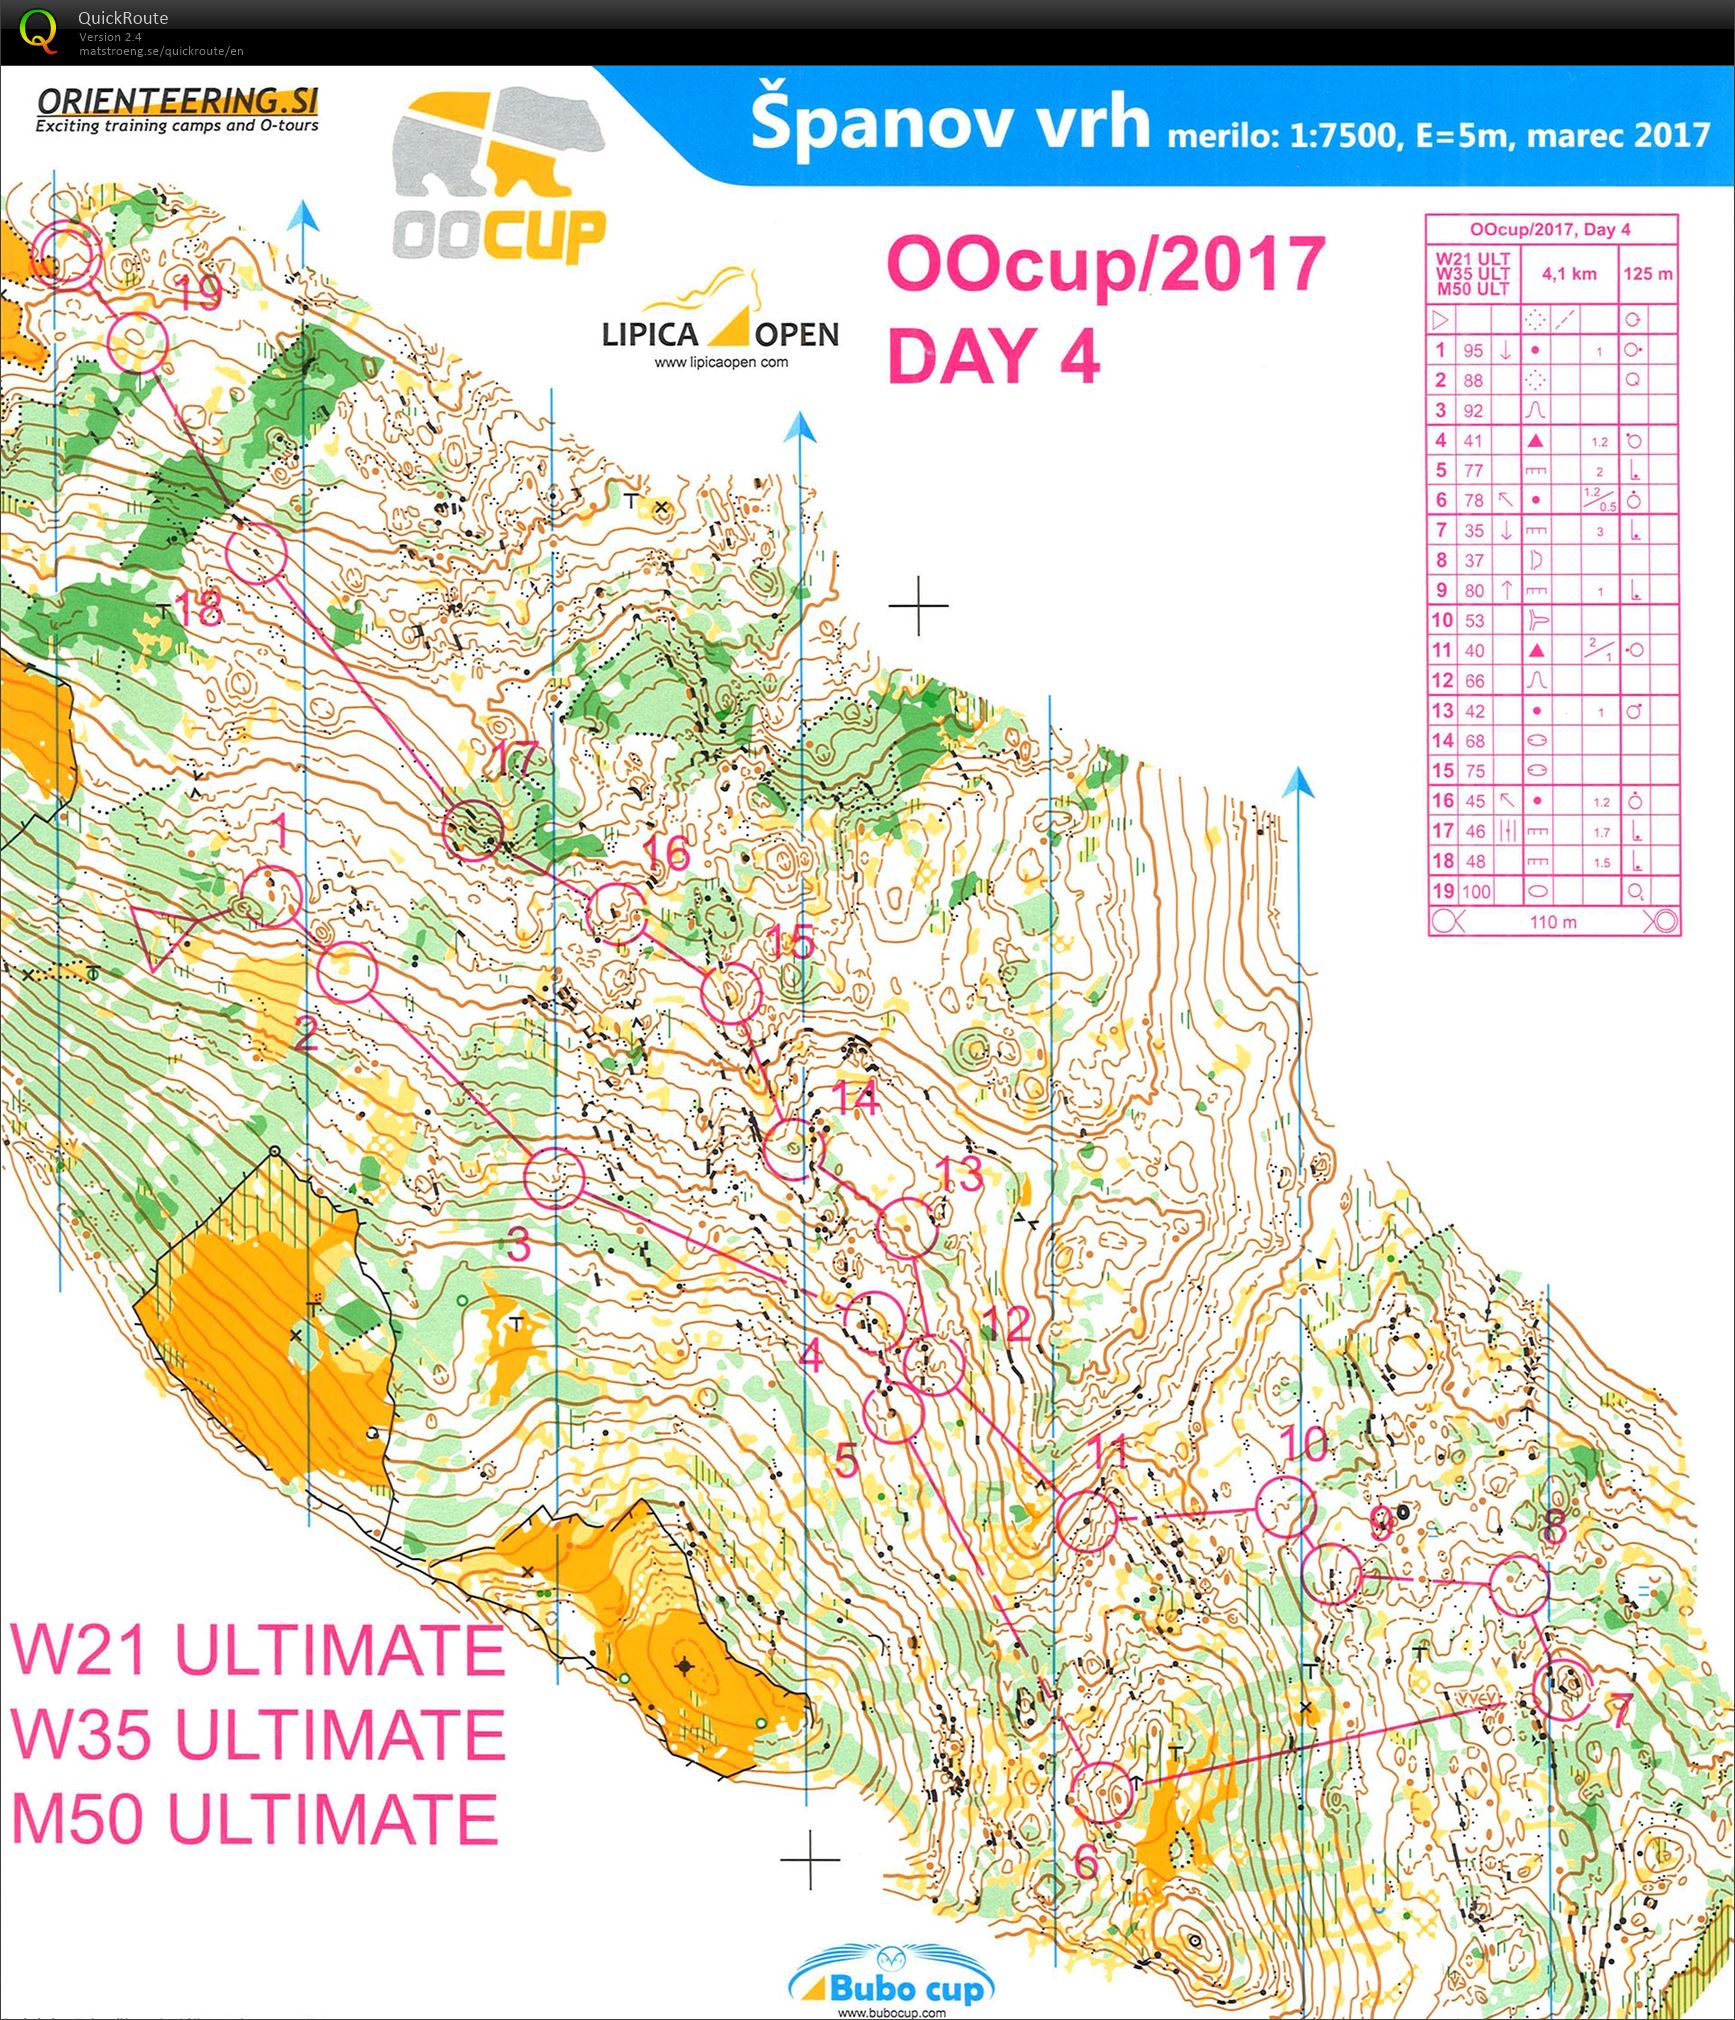 OOcup 2017 Day 4 (27.07.2017)